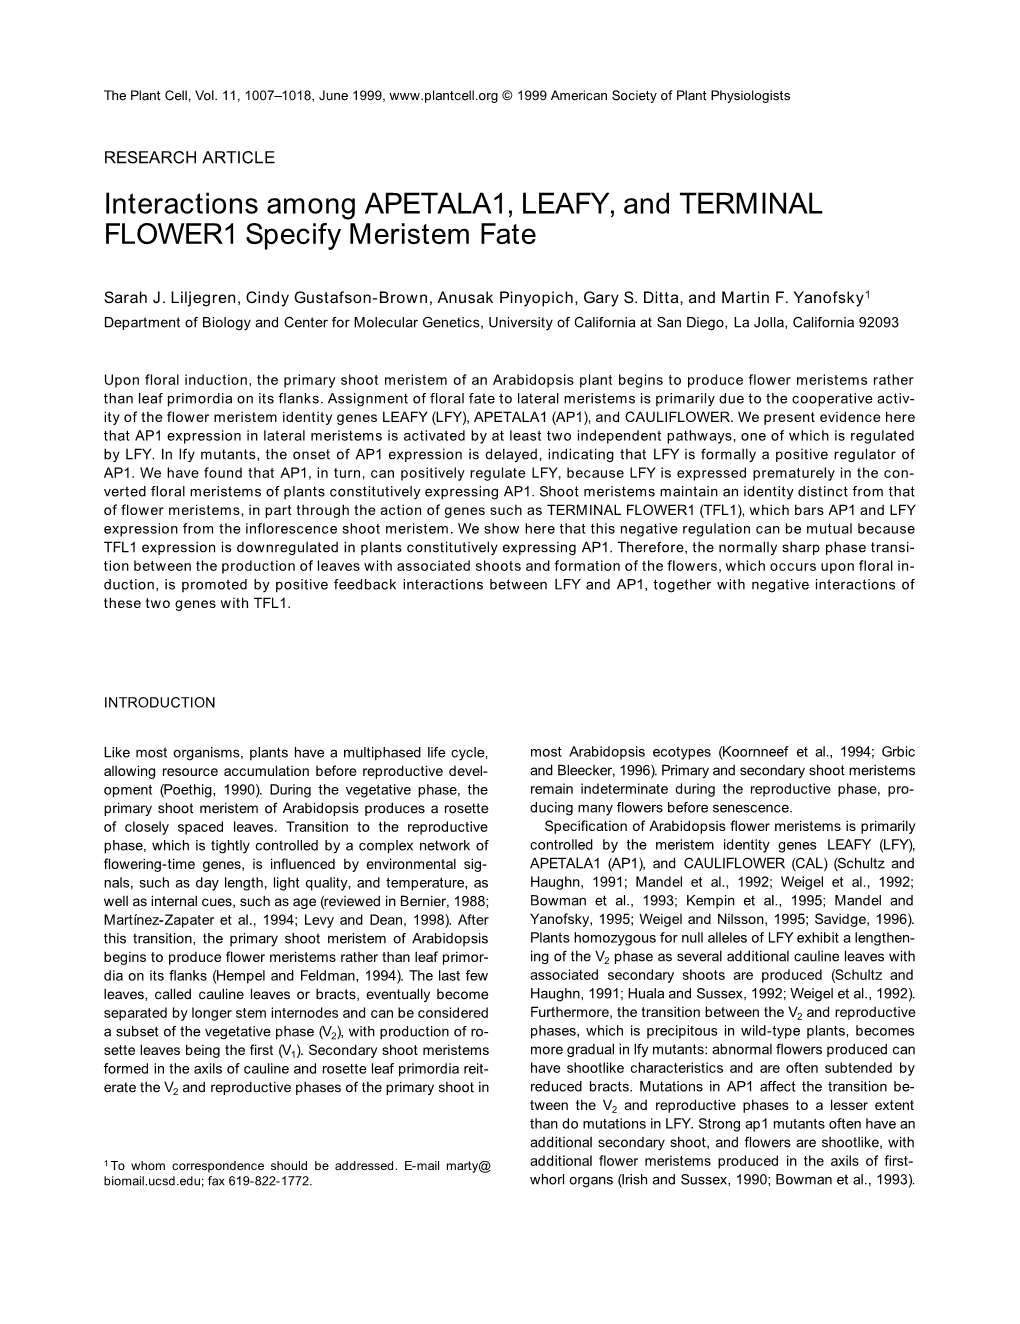 Interactions Among APETALA1, LEAFY, and TERMINAL FLOWER1 Specify Meristem Fate